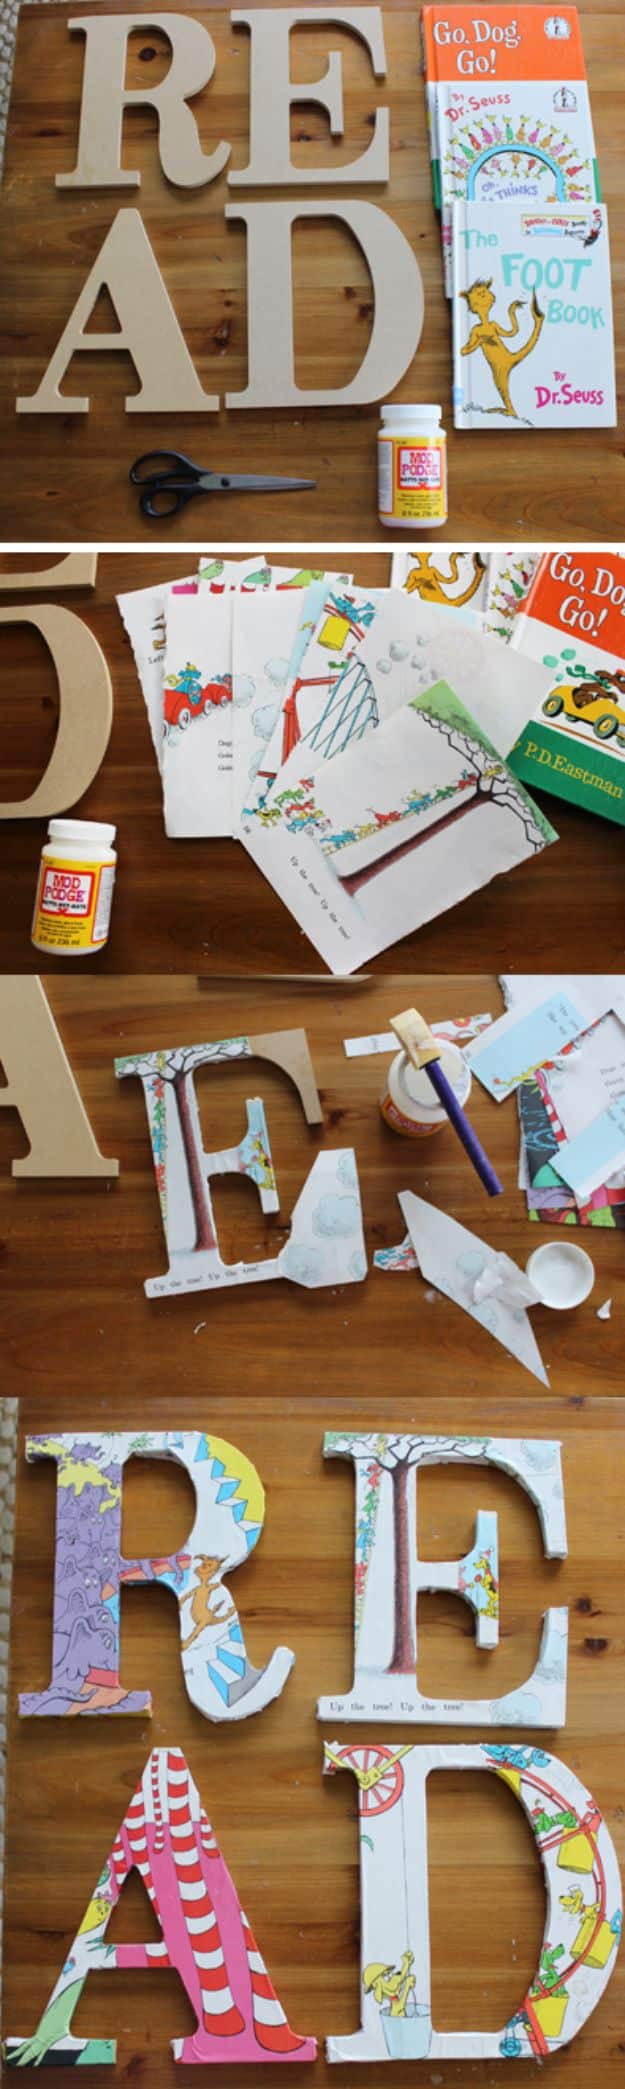 DIY Wall Letters and Word Signs - DIY Decoupage Dr. Seuss Read Sign for Children’s Book Nook - Initials Wall Art for Creative Home Decor Ideas - Cool Architectural Letter Projects and Wall Art Tutorials for Living Room Decor, Bedroom Ideas. Girl or Boy Nursery. Paint, Glitter, String Art, Easy Cardboard and Rustic Wooden Ideas - DIY Projects and Crafts by DIY JOY #diysigns #diyideas #diyhomedecor